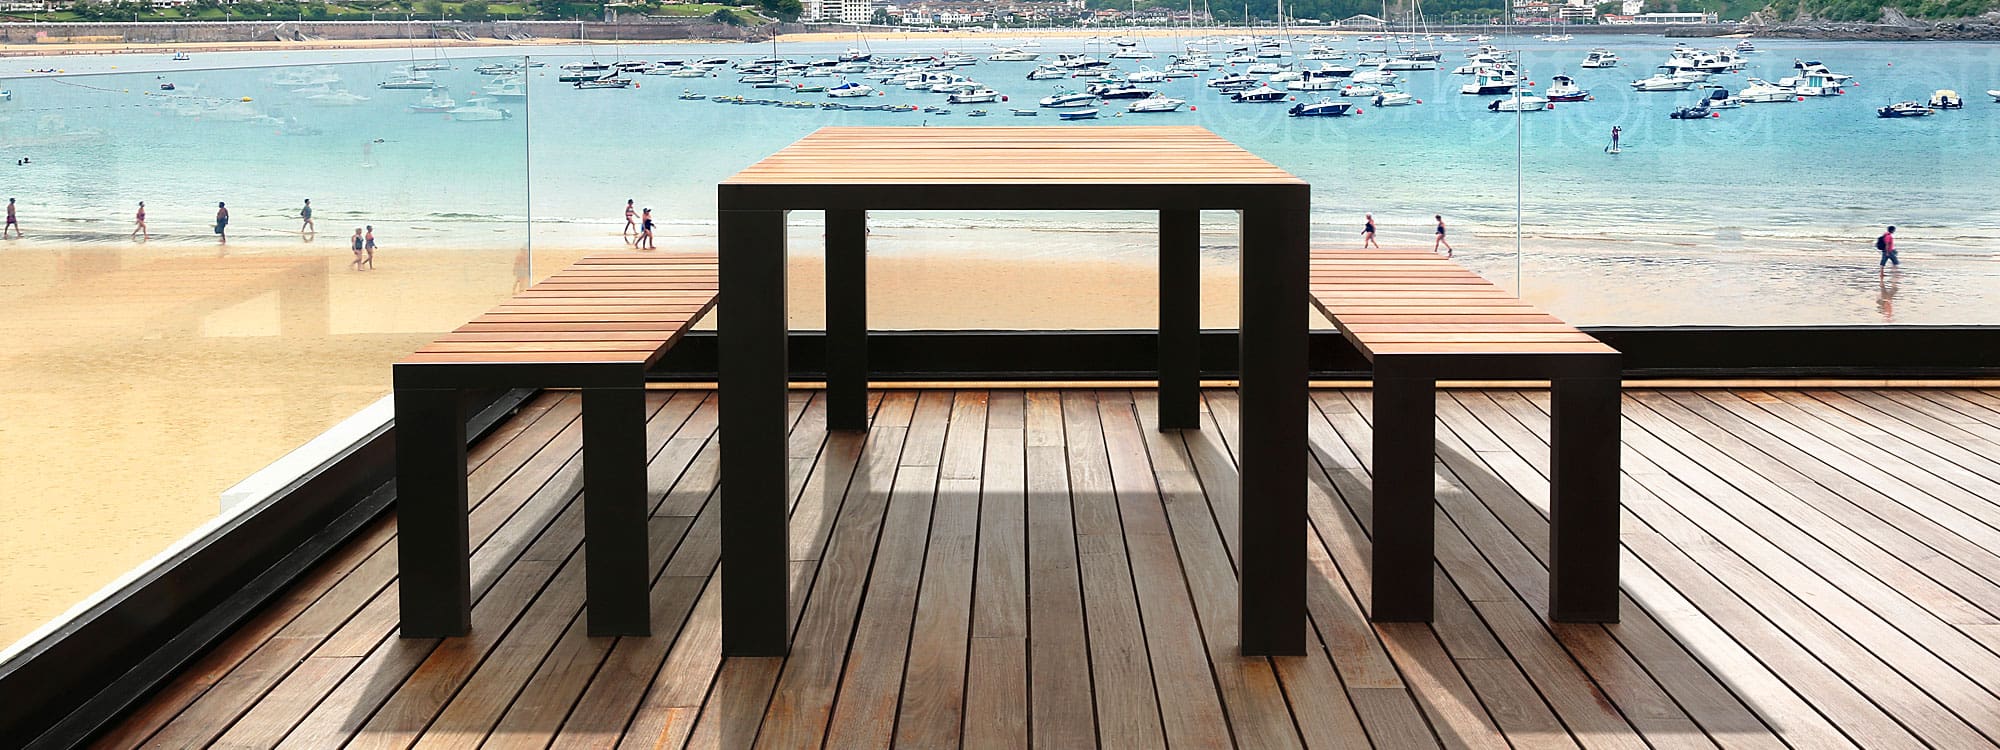 Image of Stua Deneb modern garden table and benches with black aluminium frames and teak slats, shown in wooden decked terrace with multiple moored boats in a bay in the background